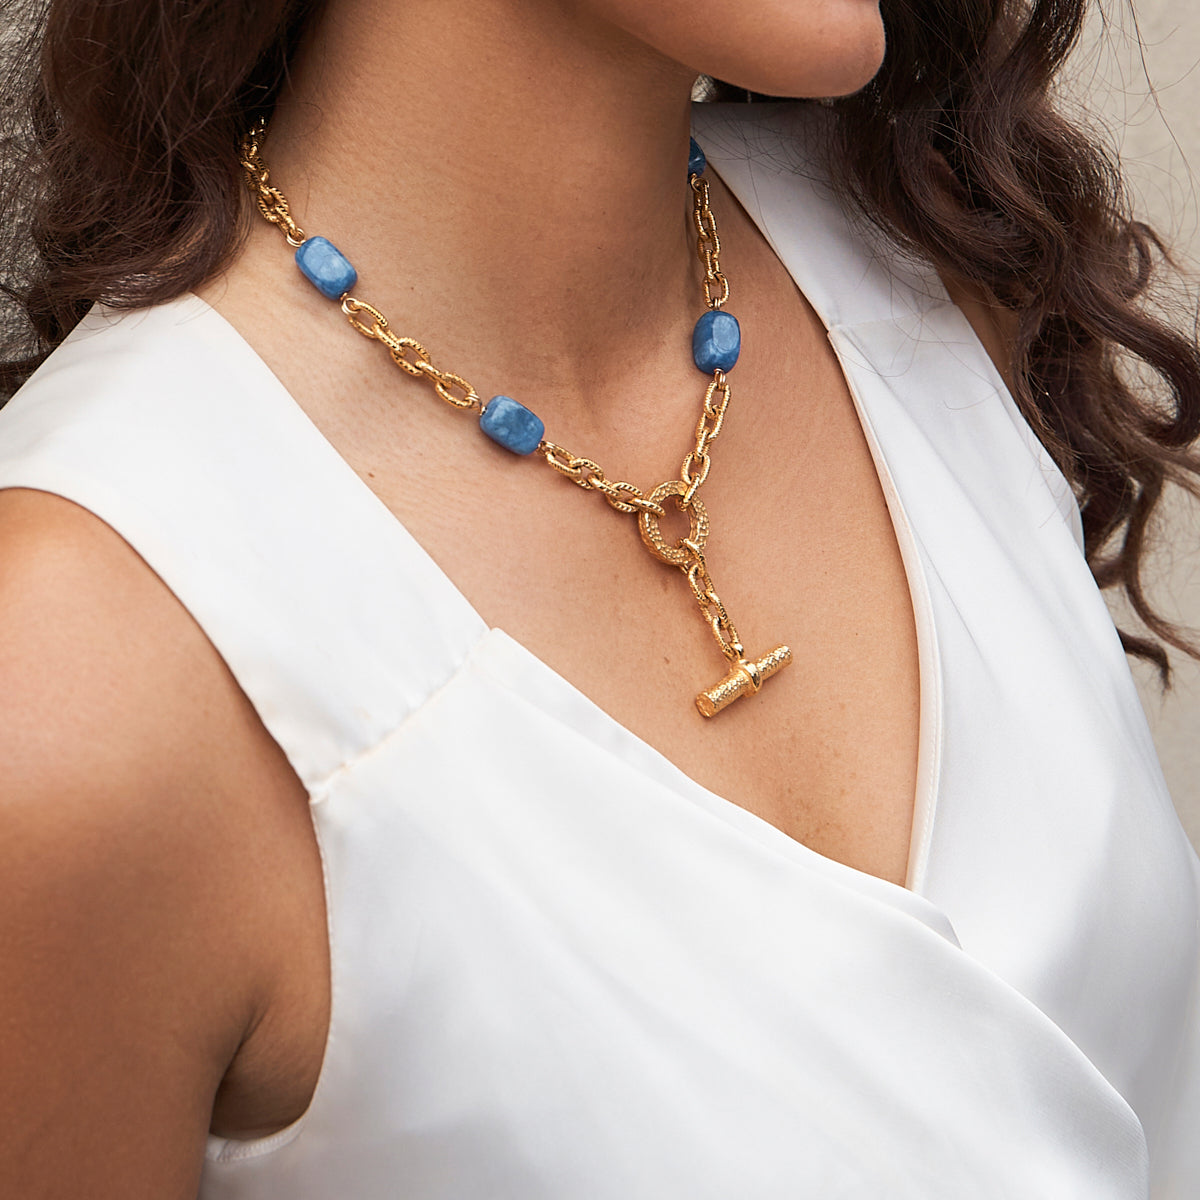 Buy Aqua Blue Stone 14K Gold Chain Beach Necklace Turquoise Necklace-925  Sterling Silver Christmas Gift Gift for Her Online in India - Etsy